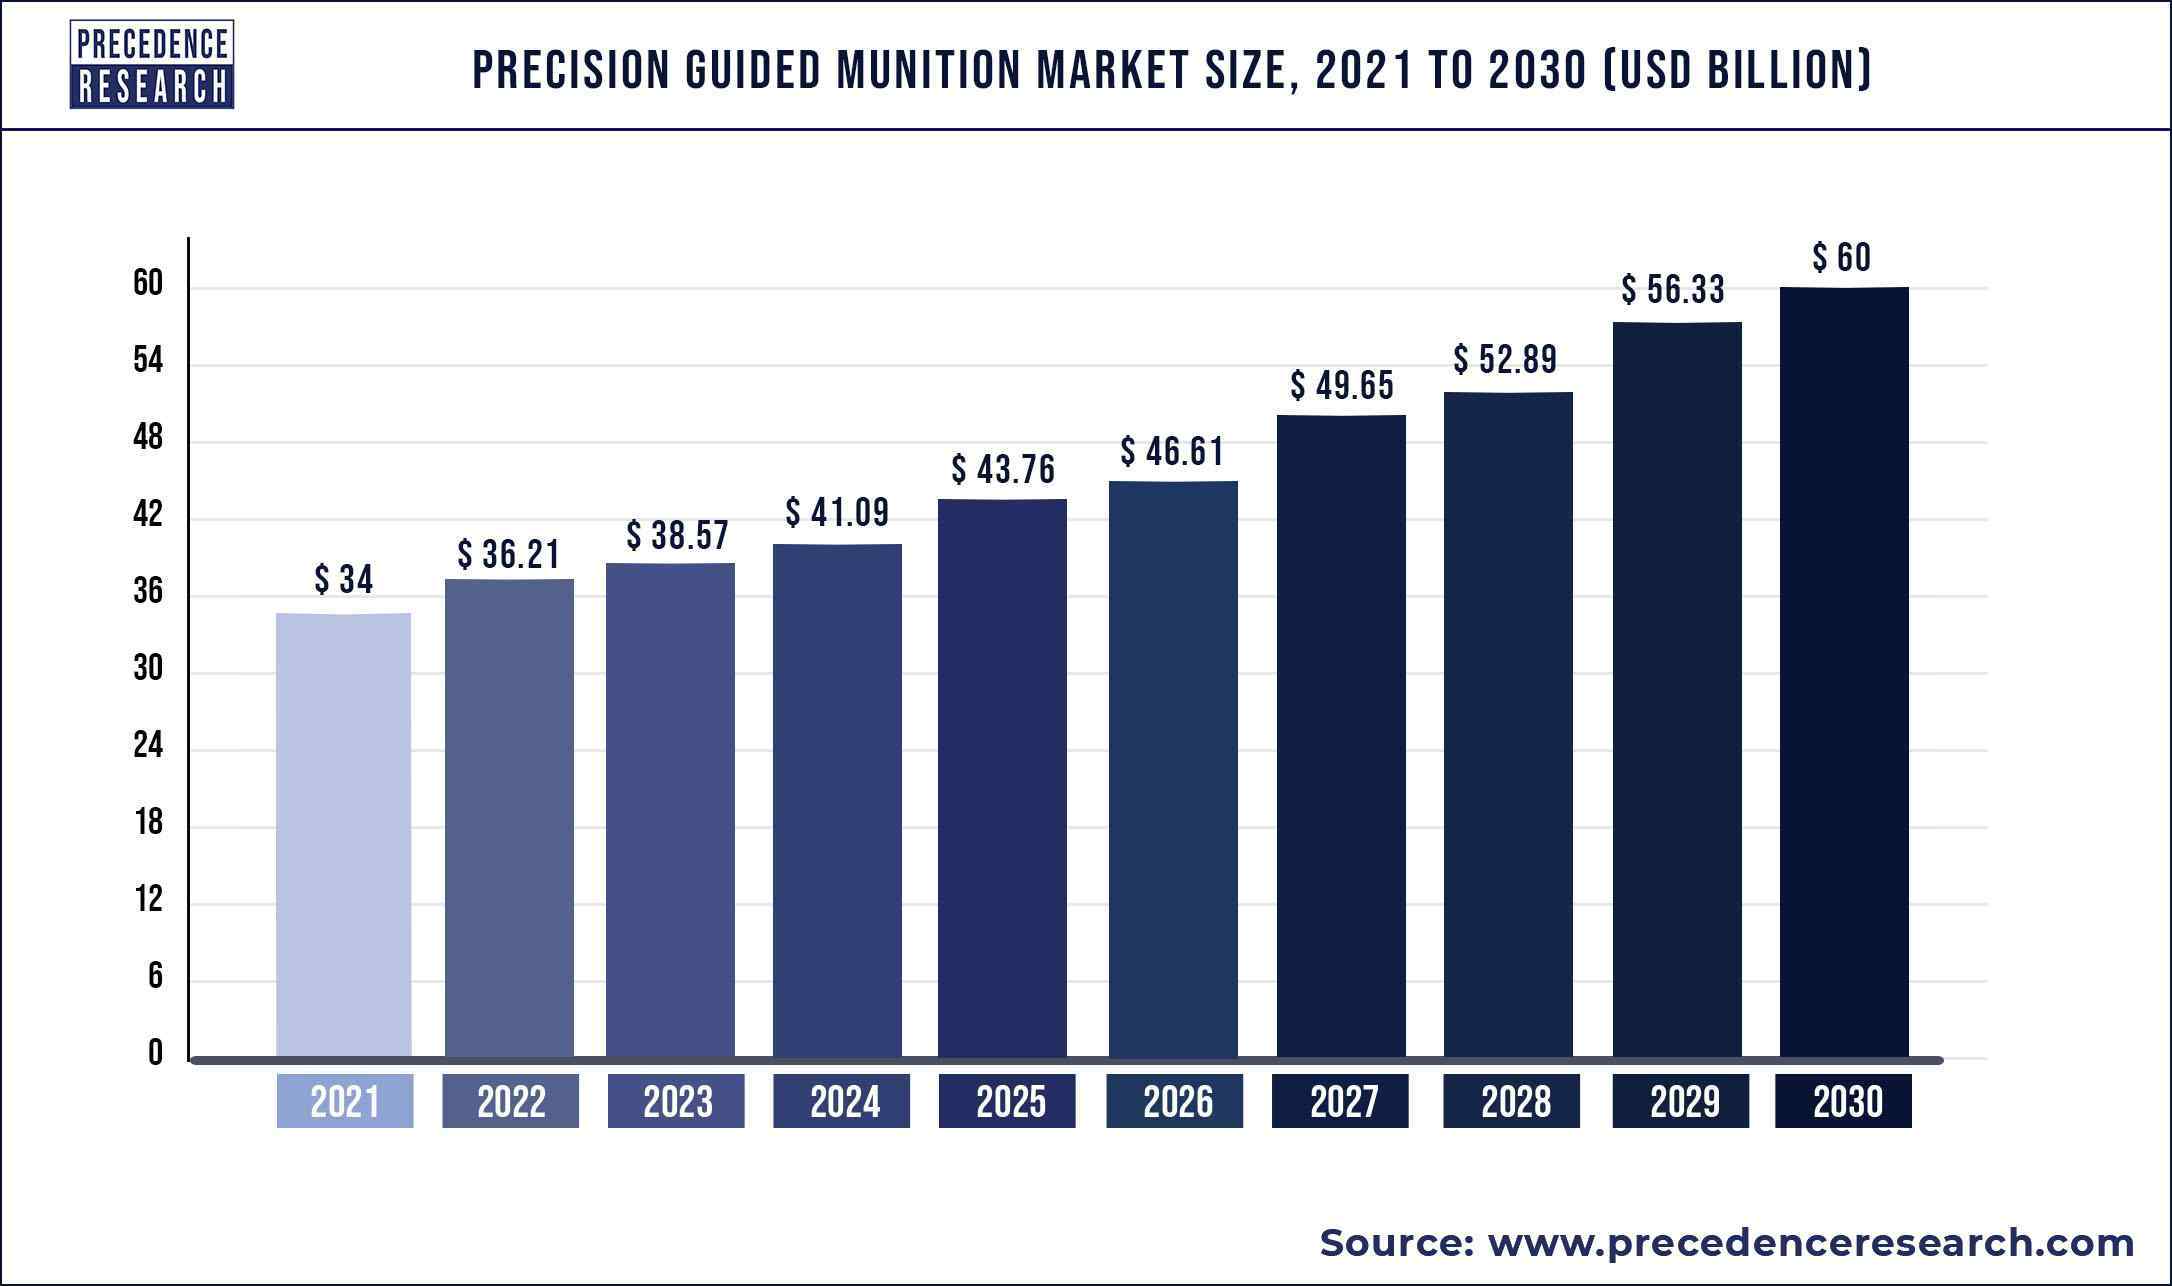 Precision Guided Munition Market Size 2021 to 2030